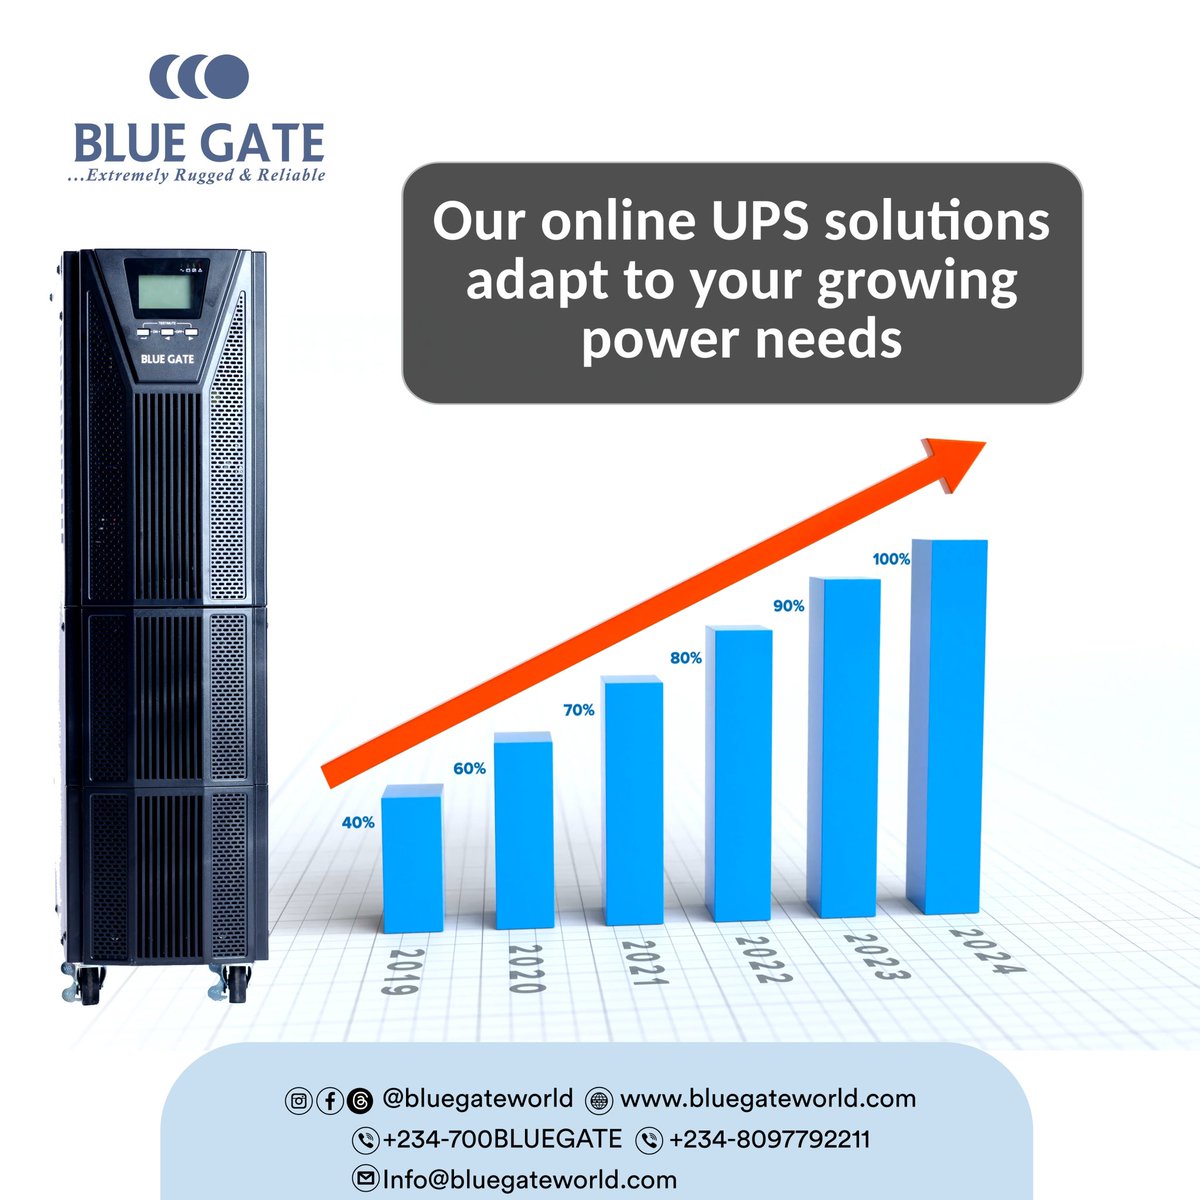 You can ensure continuous operation of your industrial machinery and equipment, even during power fluctuations. 

Trust BLUEGATE.

#ScalablePower #BigBusinessReady
#PowerProtection #AlwaysOn #FutureProof #poweroutageproblems #BLUEGATE #alternativepower #alwaysonwithbluegate